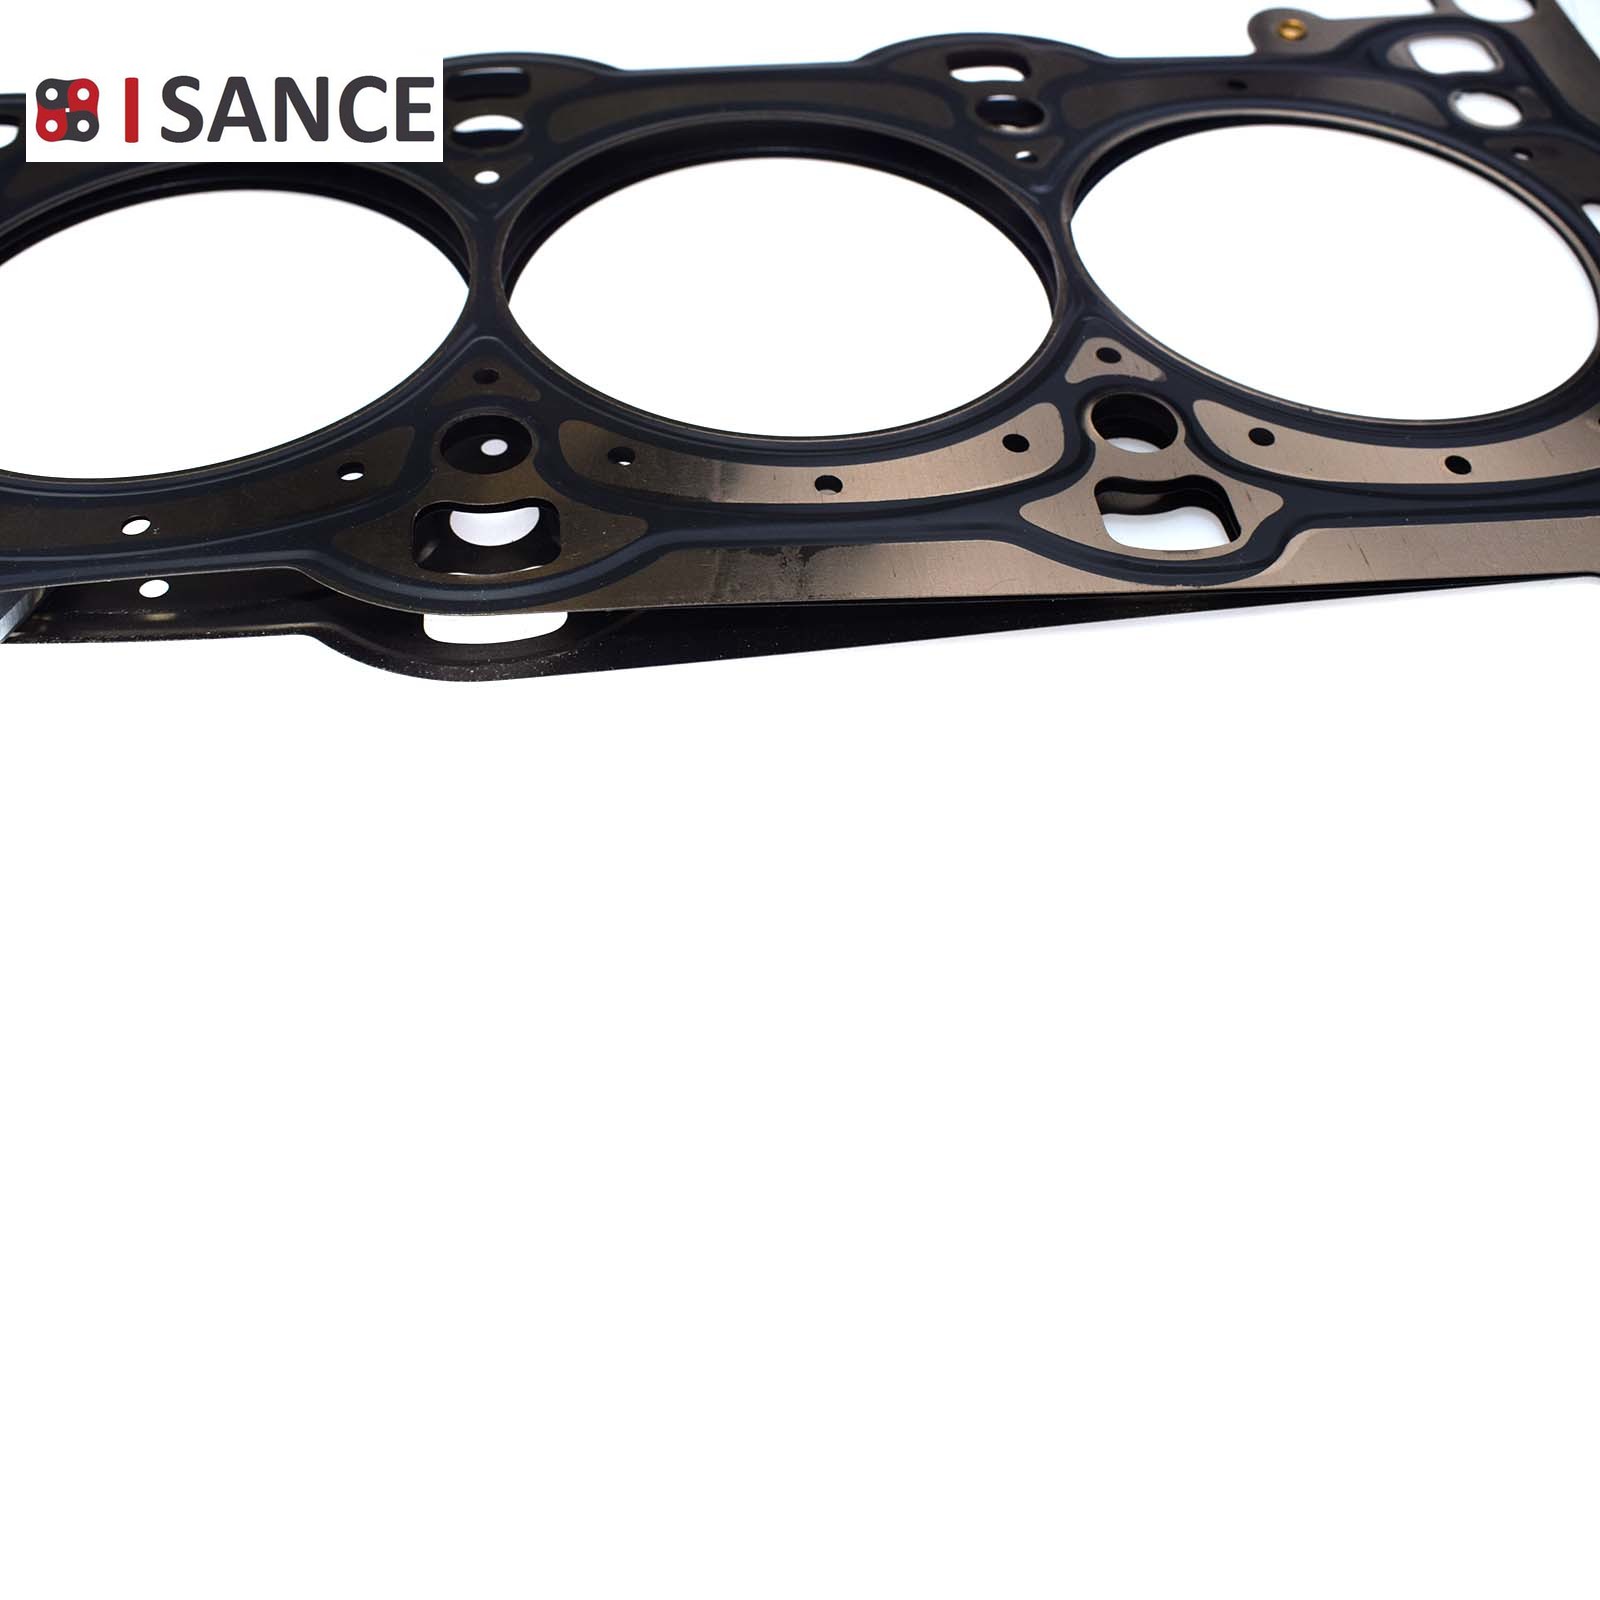 Engine Cylinder Head Gasket Seal 1.4L For Cadillac Chevrolet Buick Encore Trax ELR Cruze Sonic Volt 2011-2018 OE: 55562233